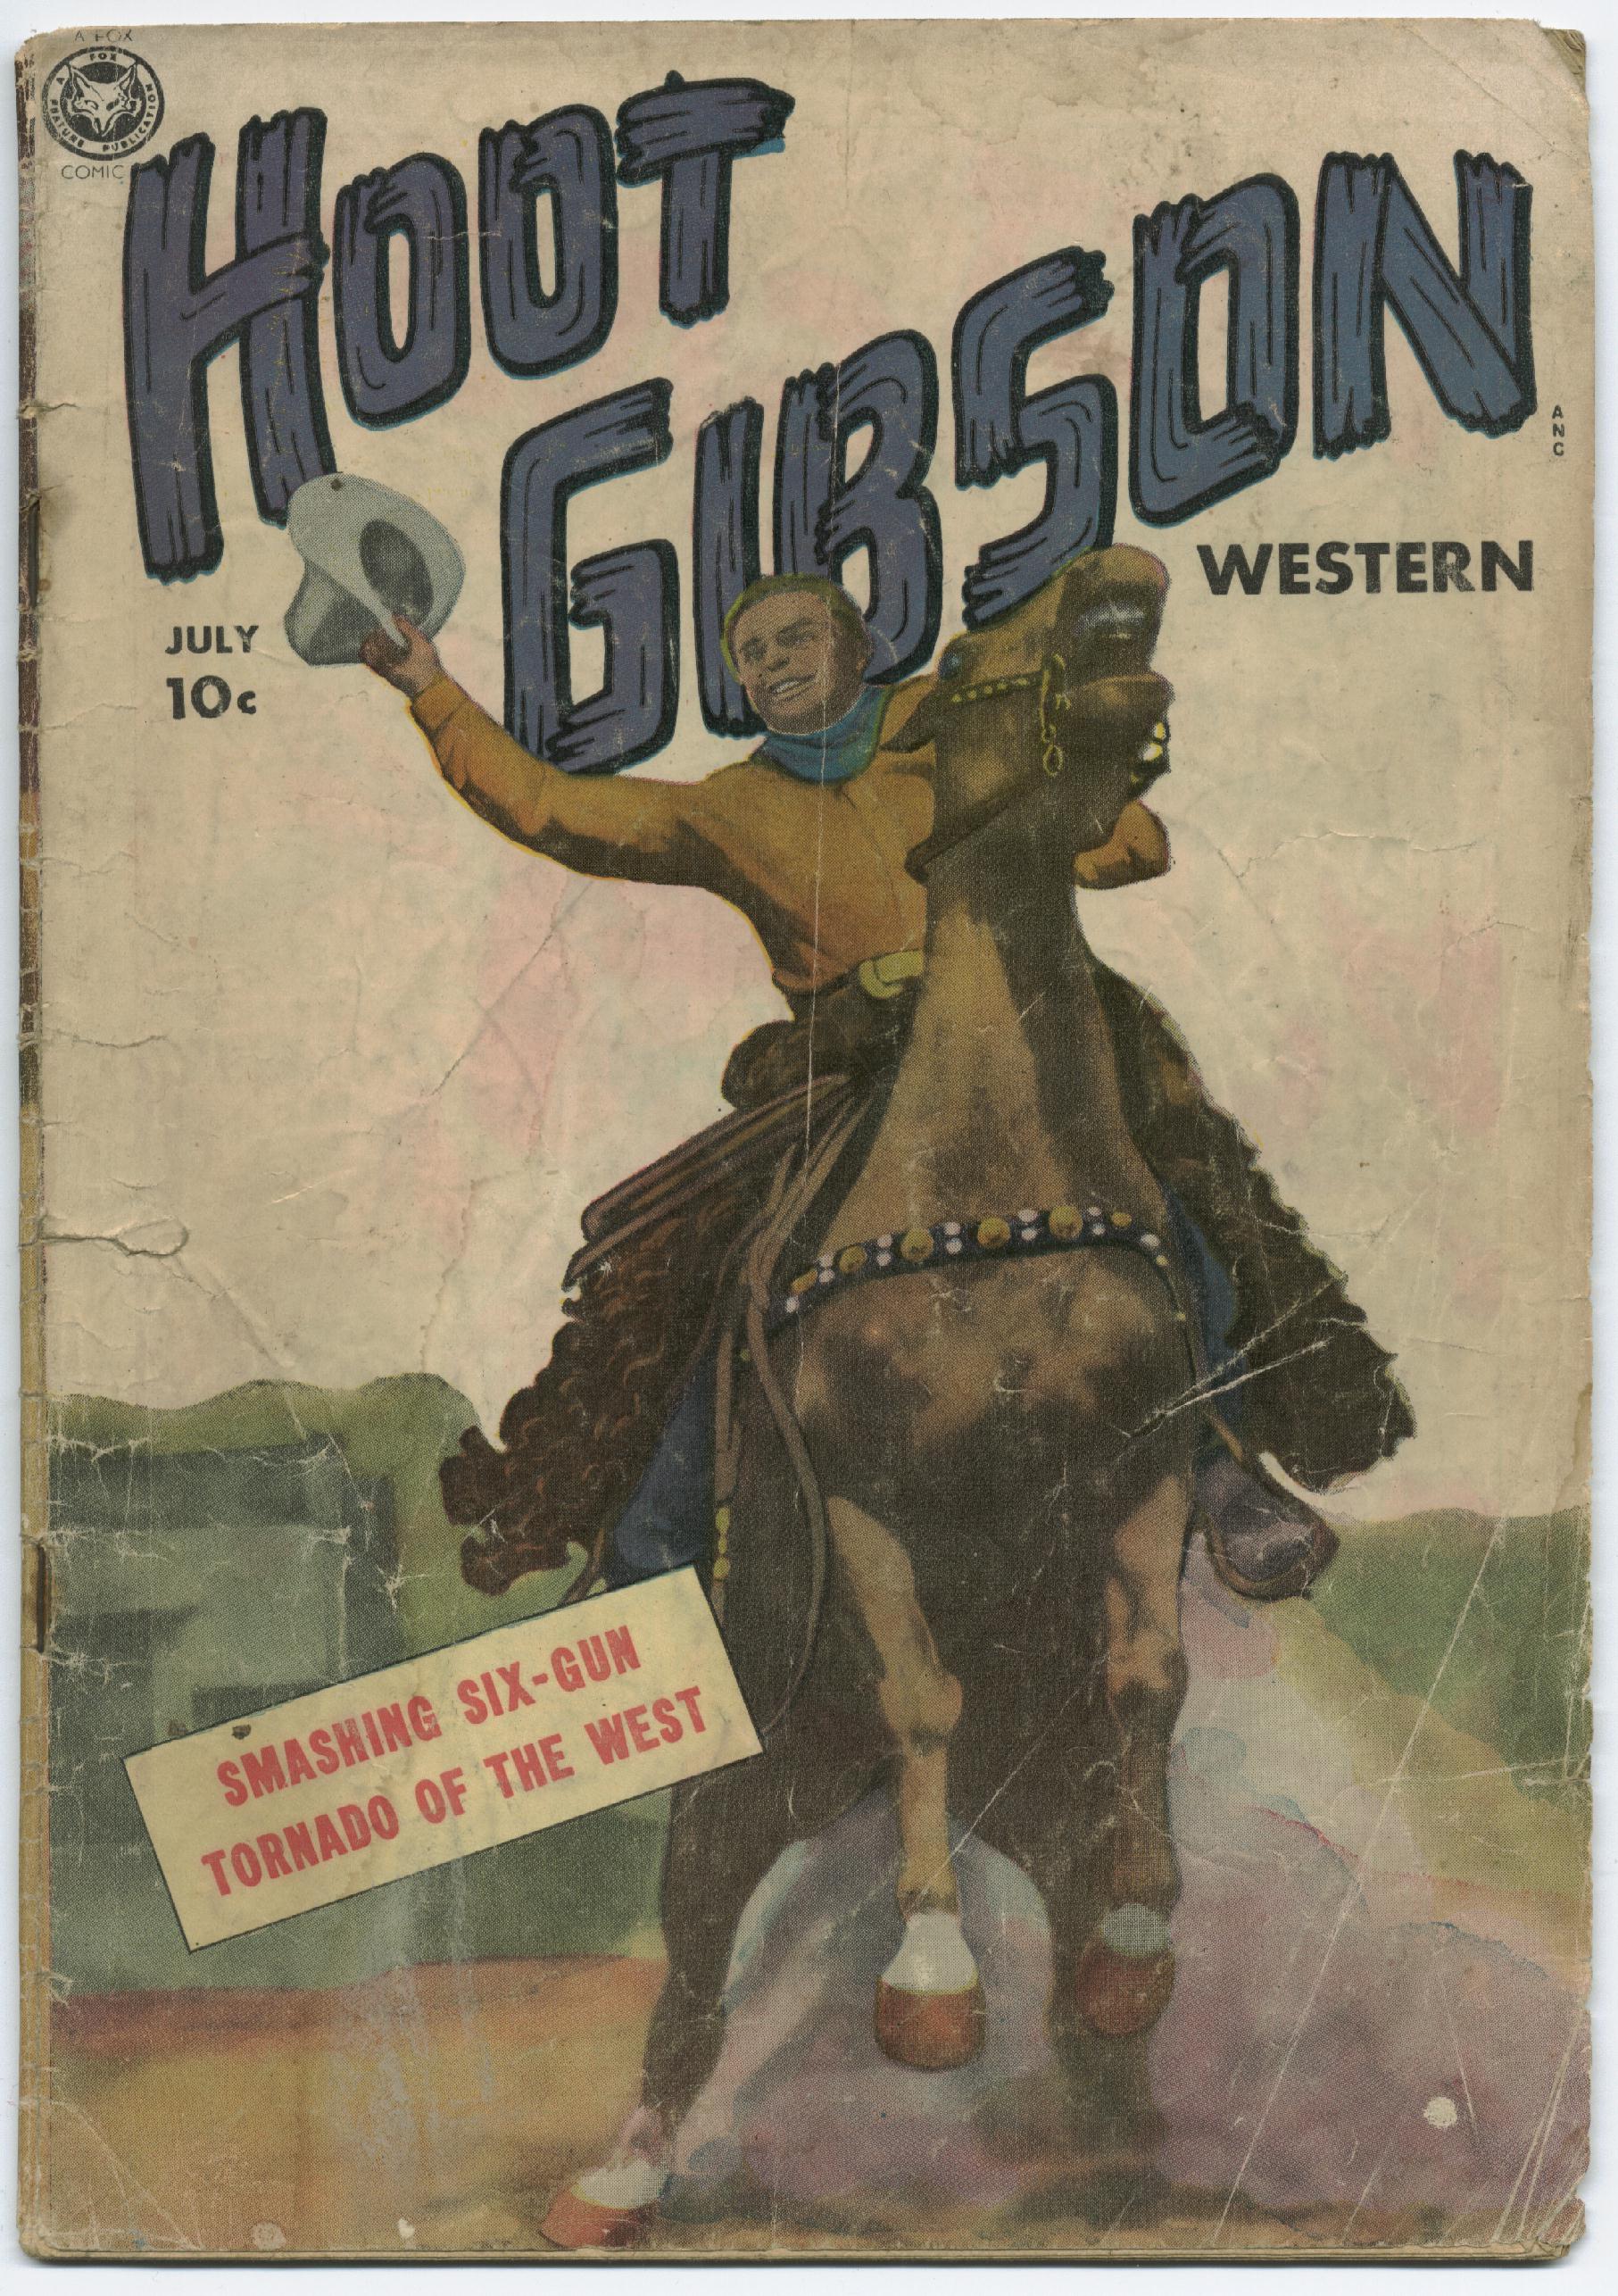 Read online Hoot Gibson comic -  Issue #2 - 1